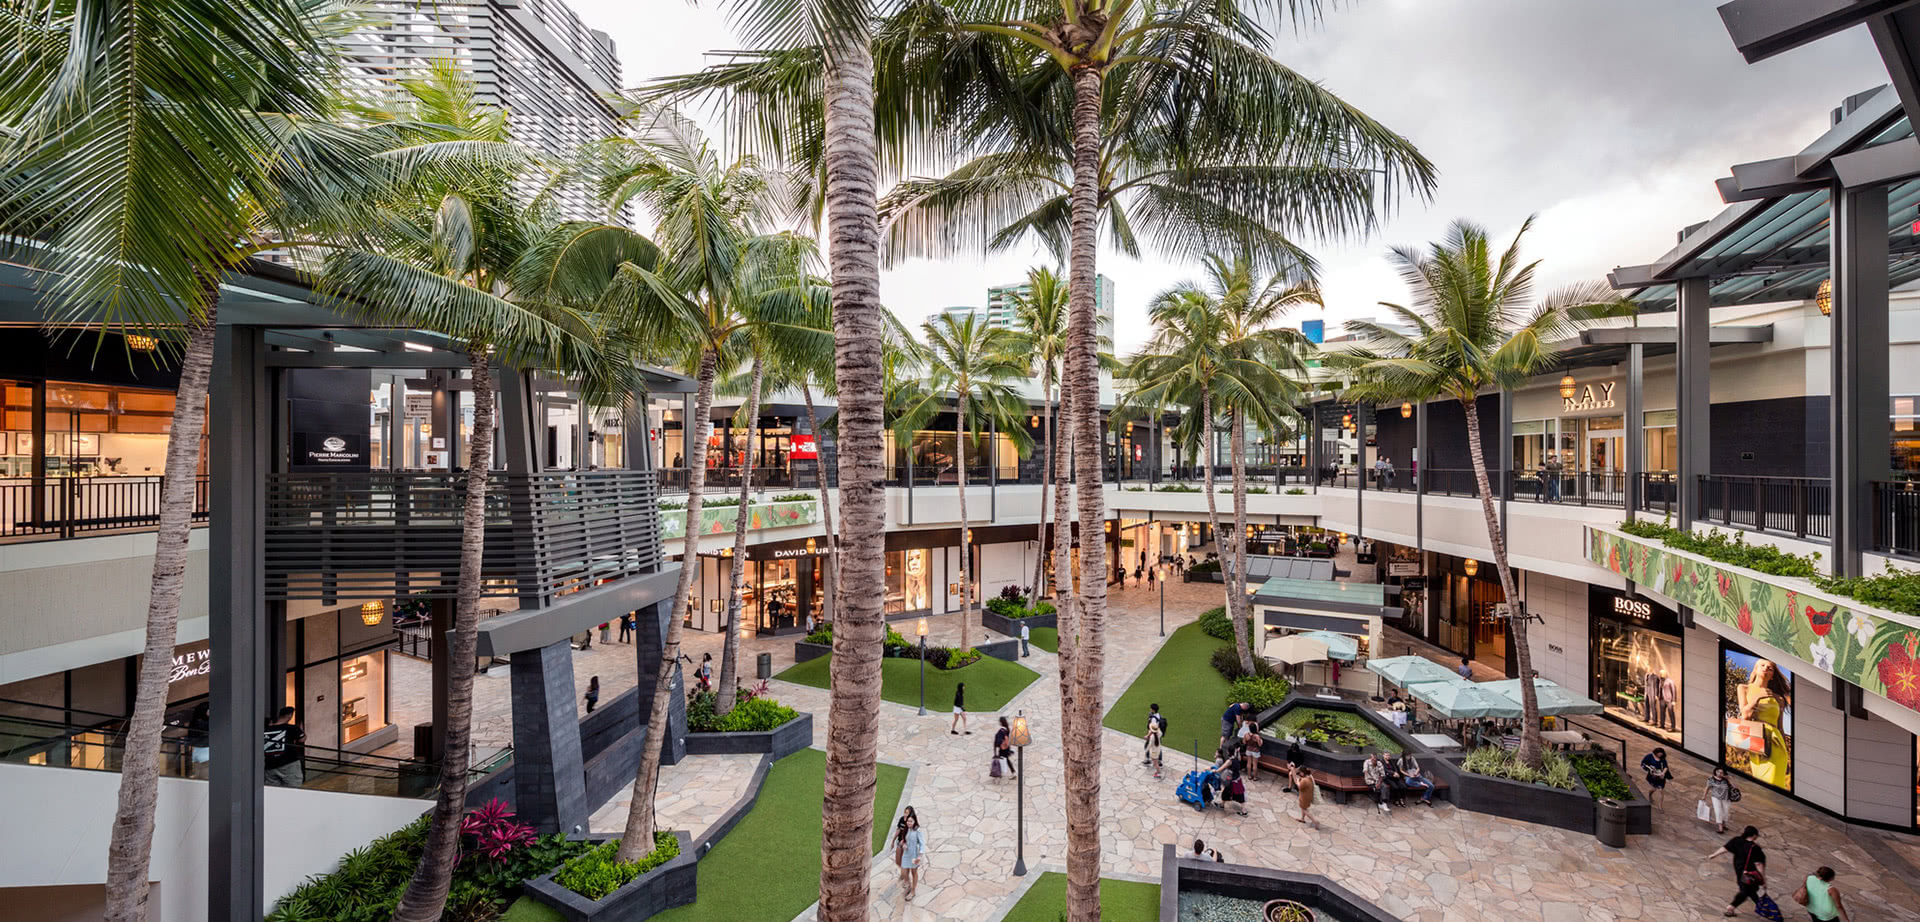 Local Luxury The Best of Both Worlds at Ala Moana YOU ARE HERE